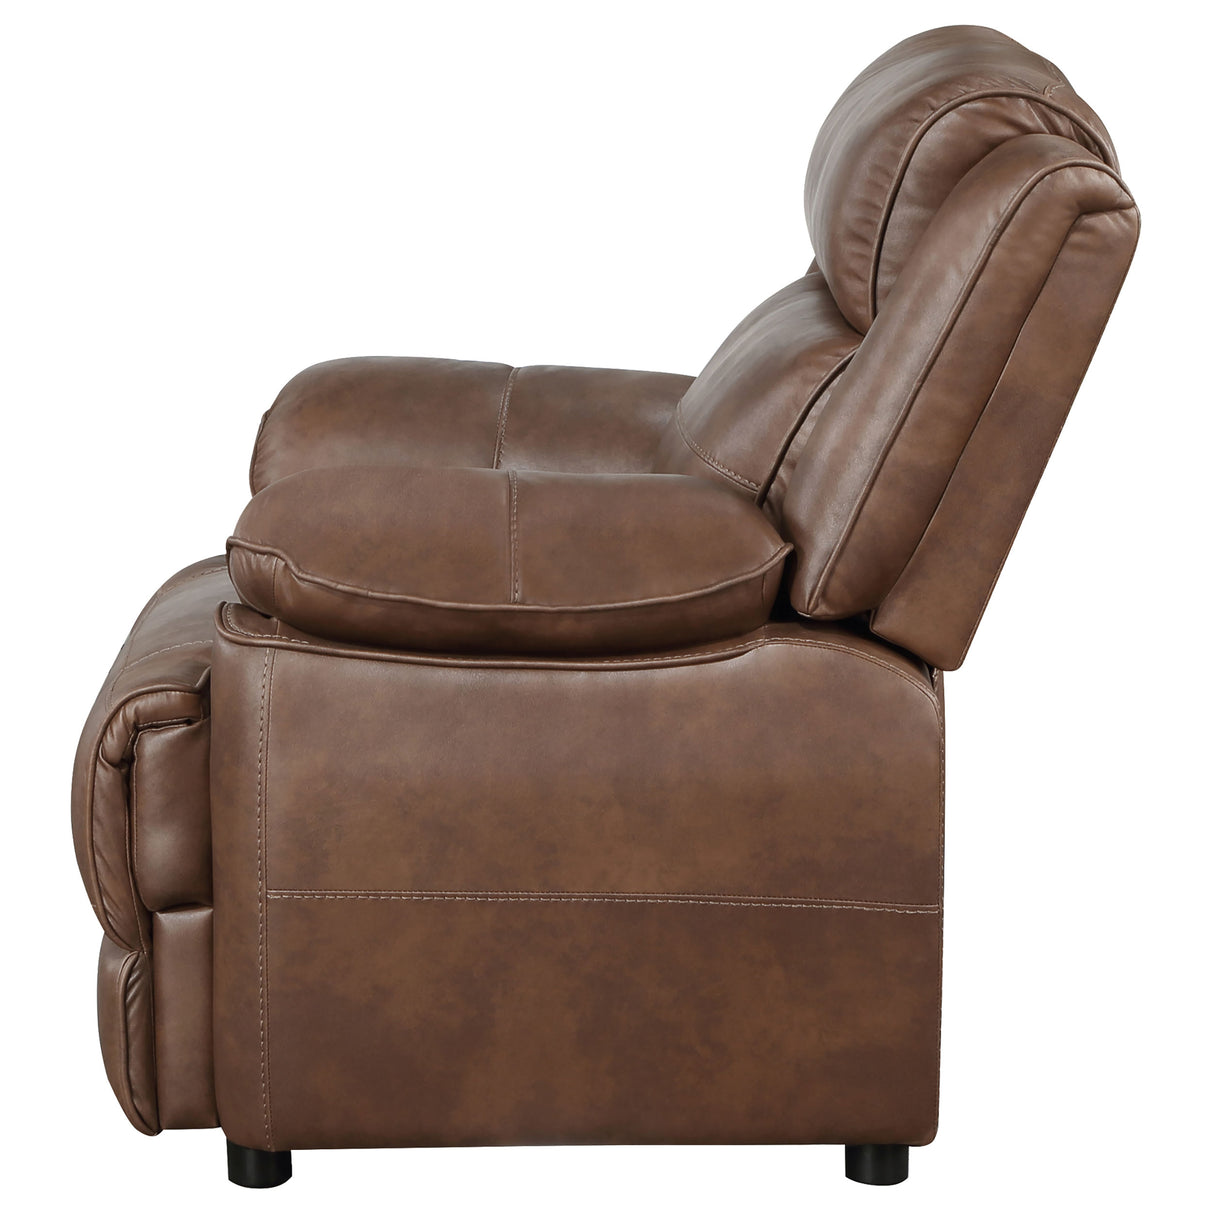 Chair - Ellington Upholstered Padded Arm Accent Chair Dark Brown